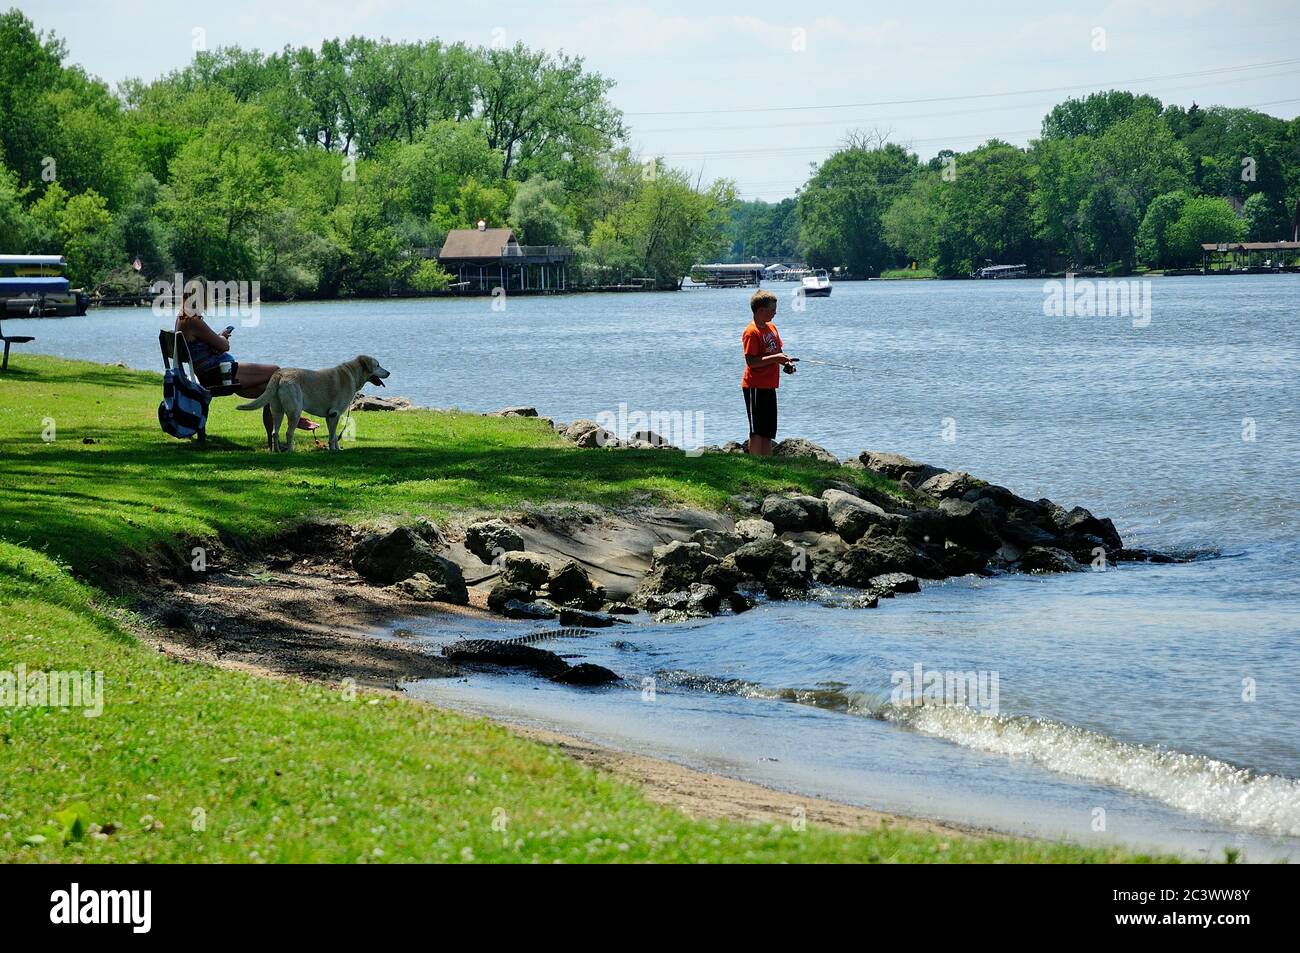 Young boy fishing from shoreline of Lions Park on the Fox River in Northern Illinois, USA. Stock Photo